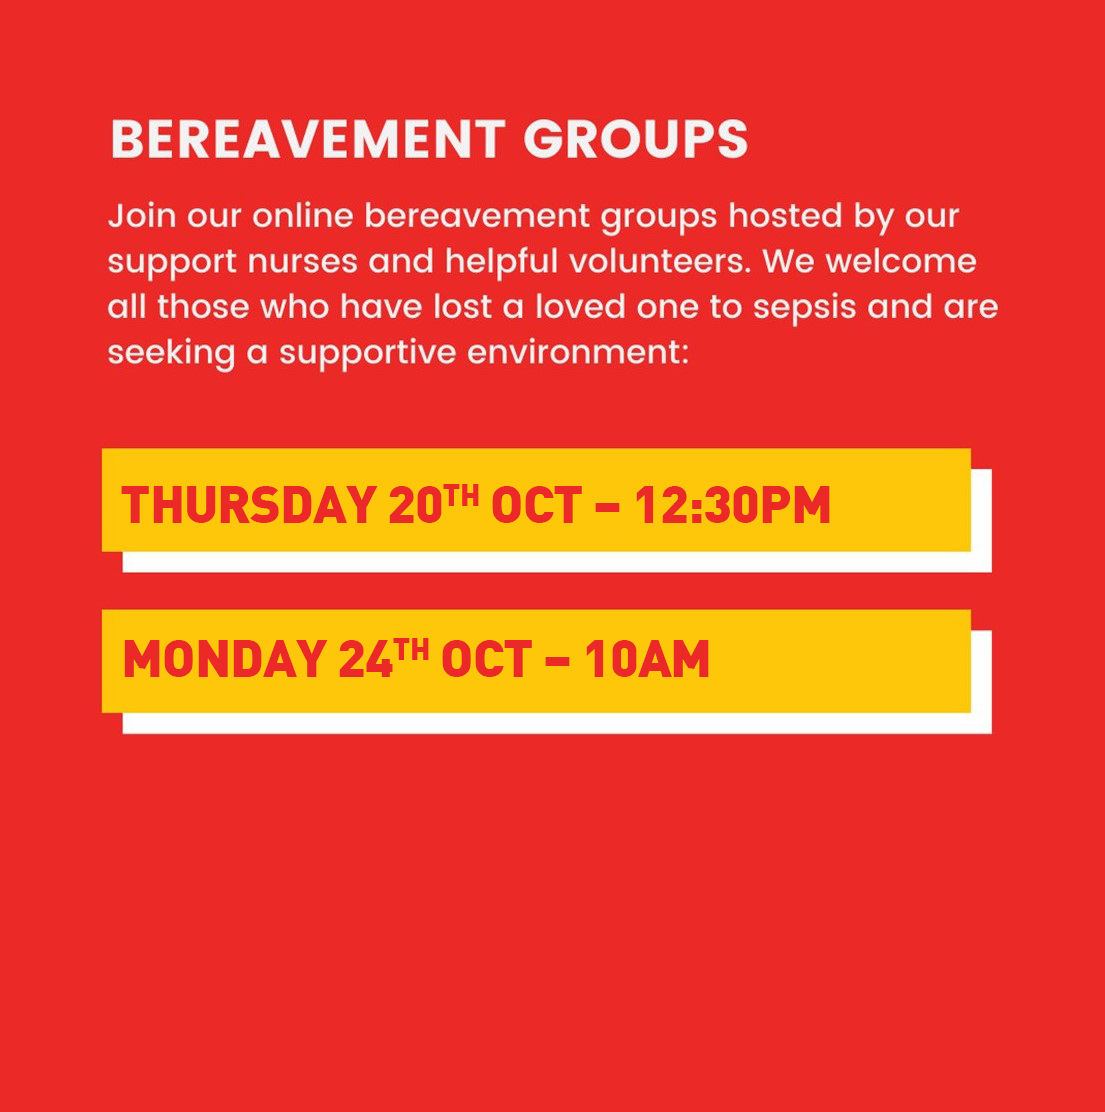 'It's a brilliant safe haven to discuss difficult issues with compassion, kindness and integrity.' - UKST Support Group Attendee. Click the link below to find out when our next virtual support group is taking place. sepsistrust.org/get-support/su…